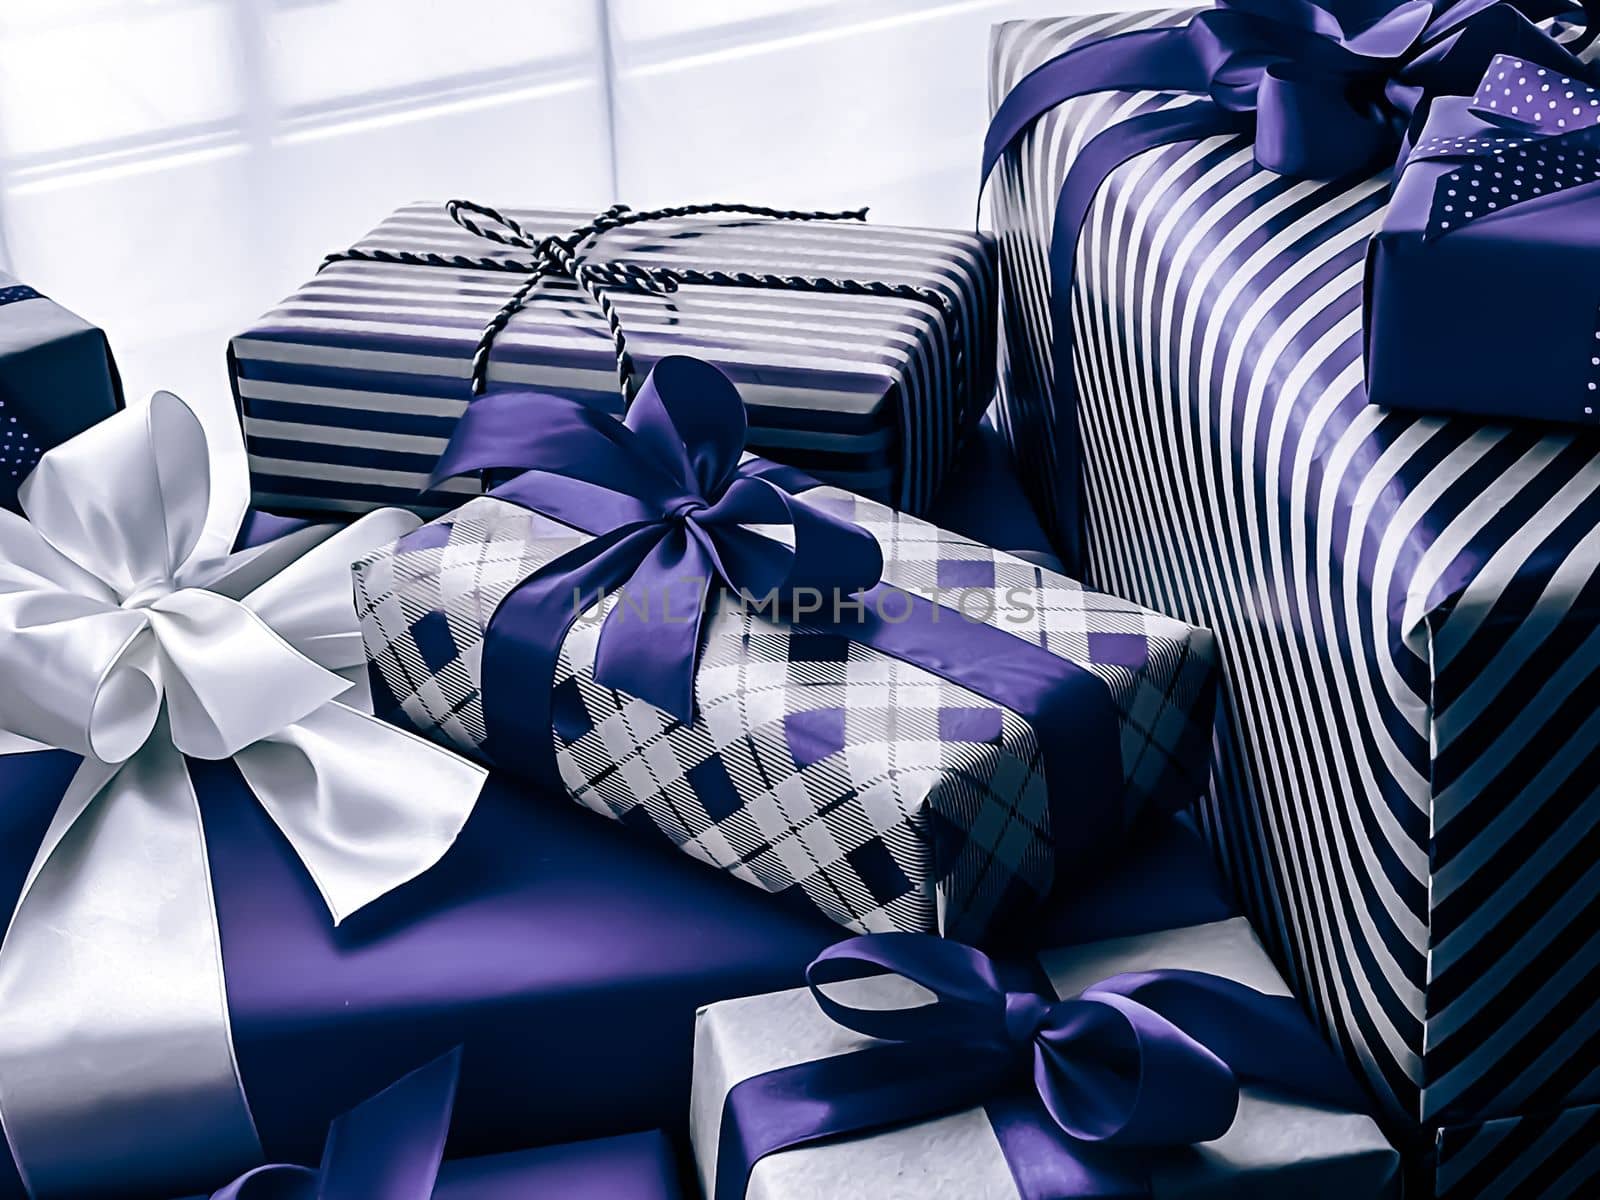 Holiday gifts and wrapped luxury presents, purple gift boxes as surprise present for birthday, Christmas, New Year, Valentines Day, boxing day, wedding and holidays shopping or beauty box delivery by Anneleven